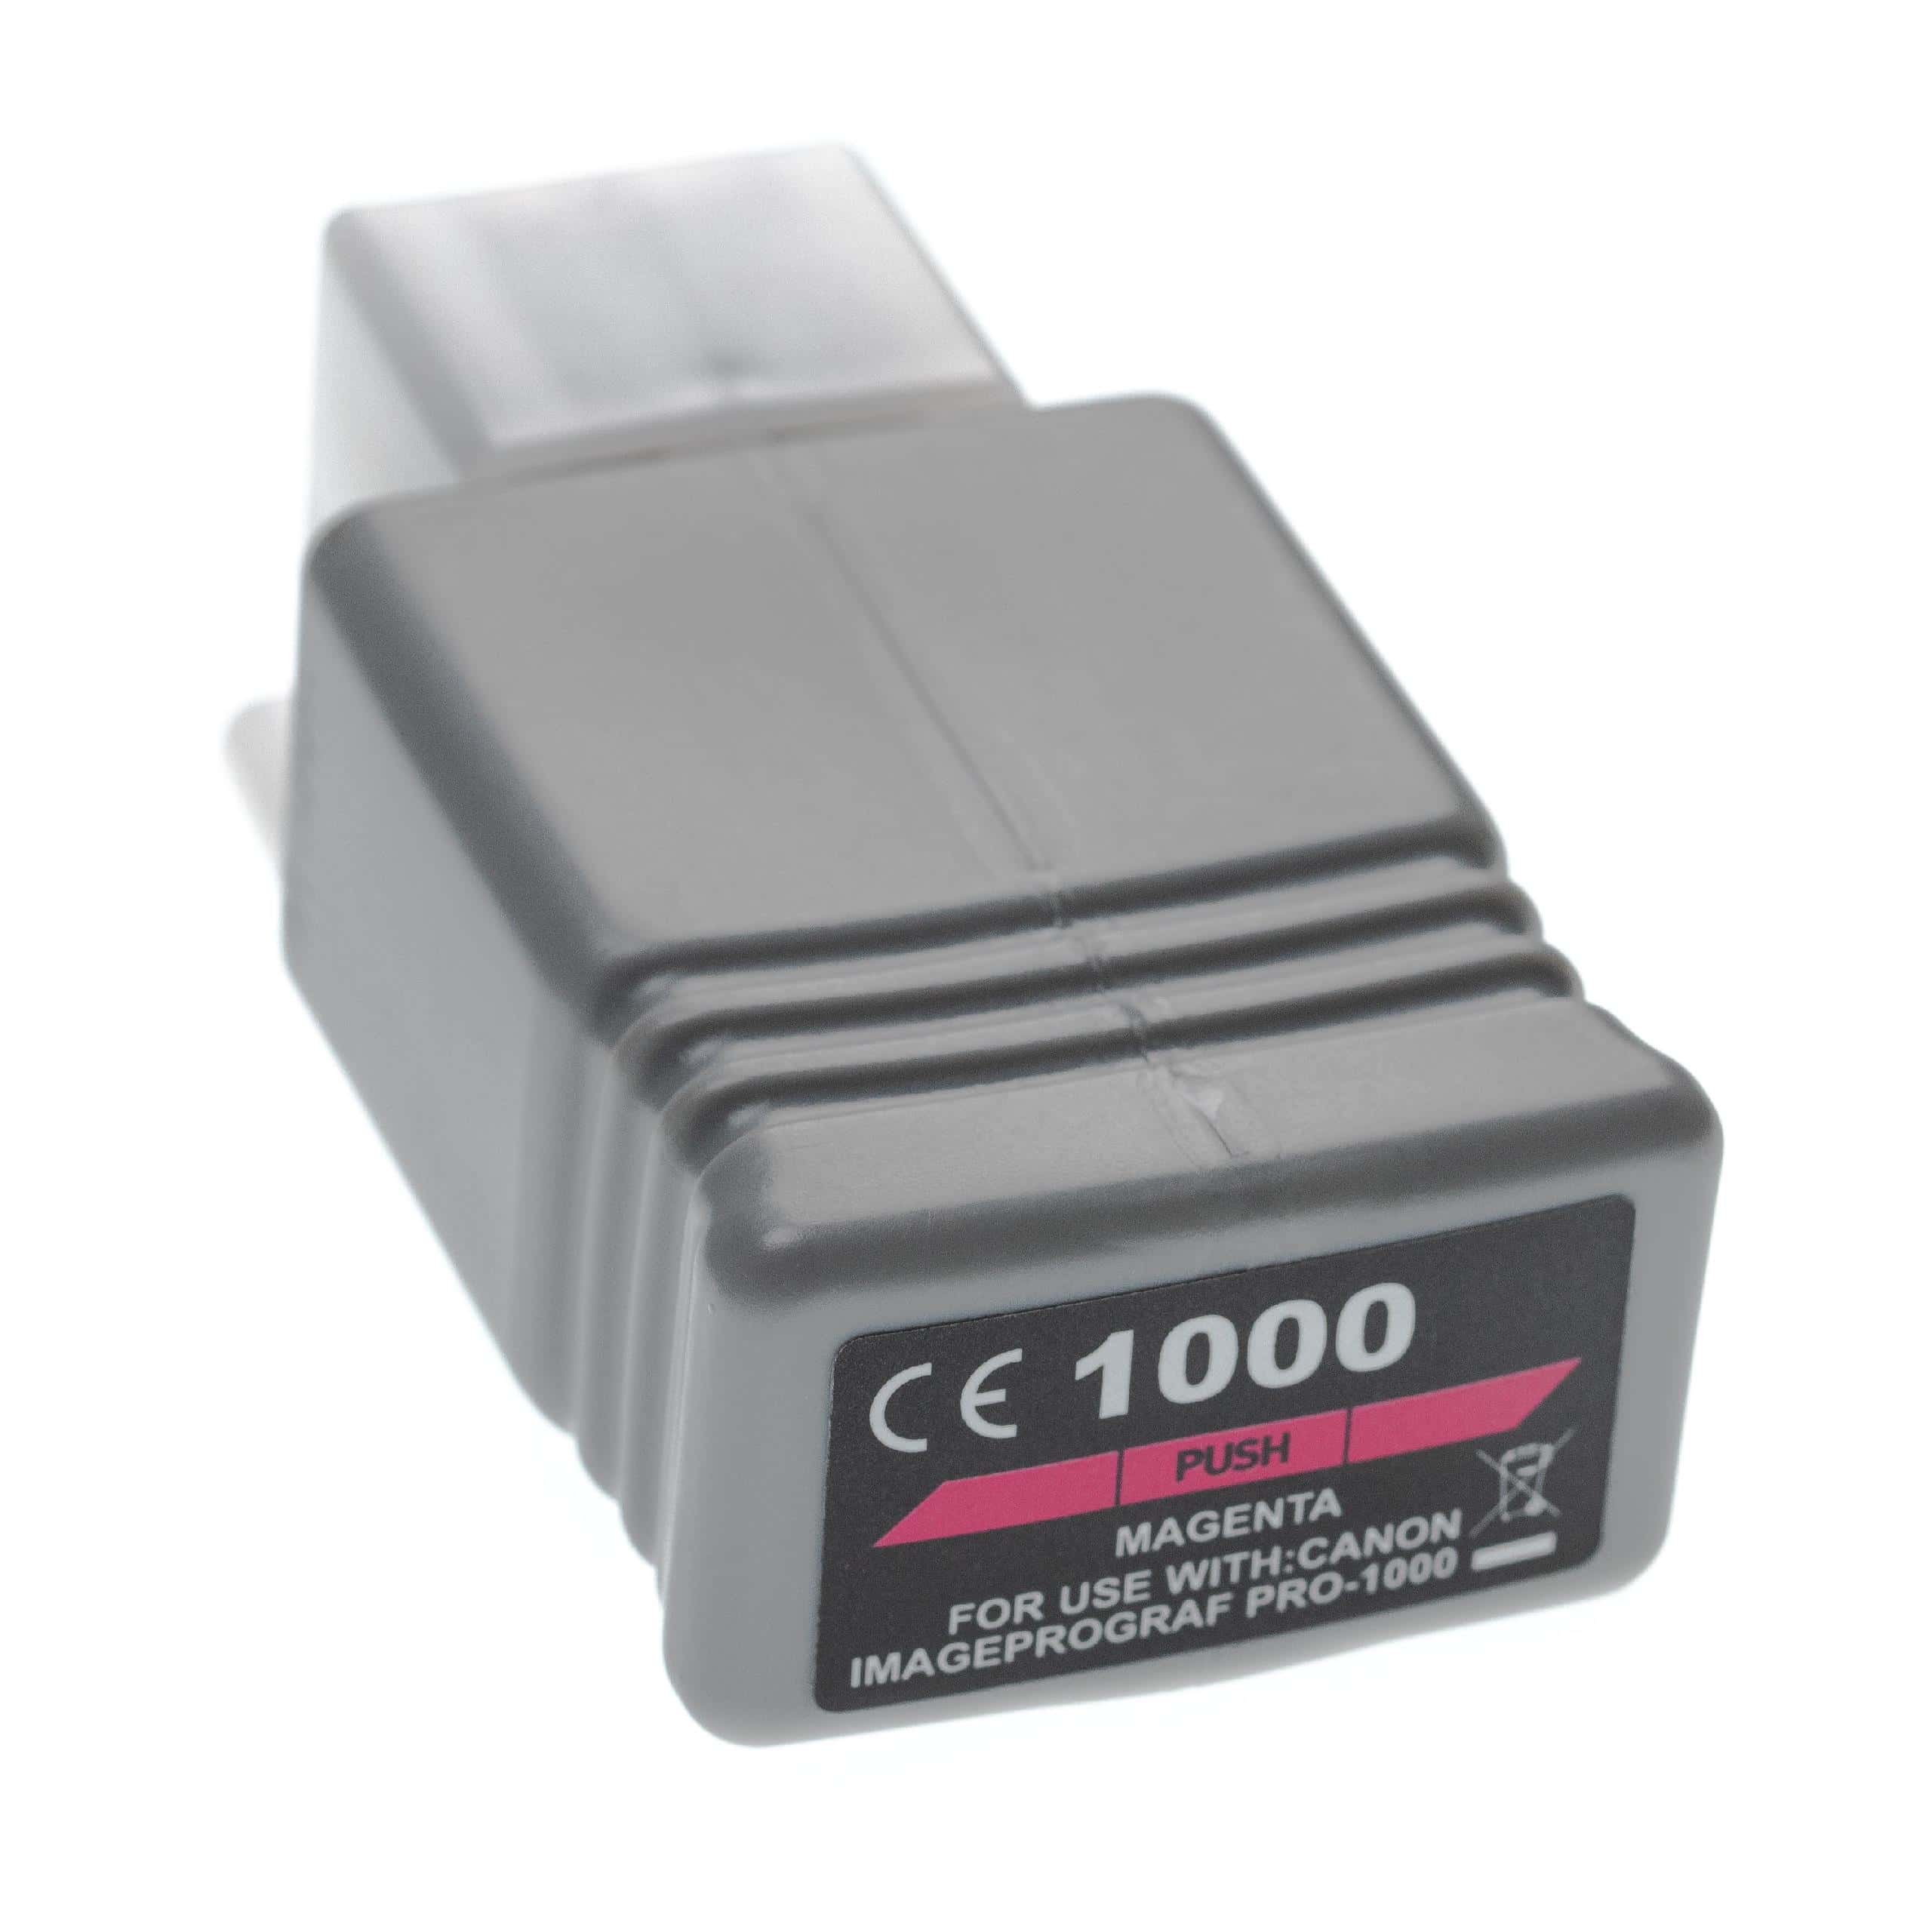 Ink Cartridge as Exchange for Canon PFI-1000M, PFI-1000 M for Canon Printer - Magenta 80 ml + Chip